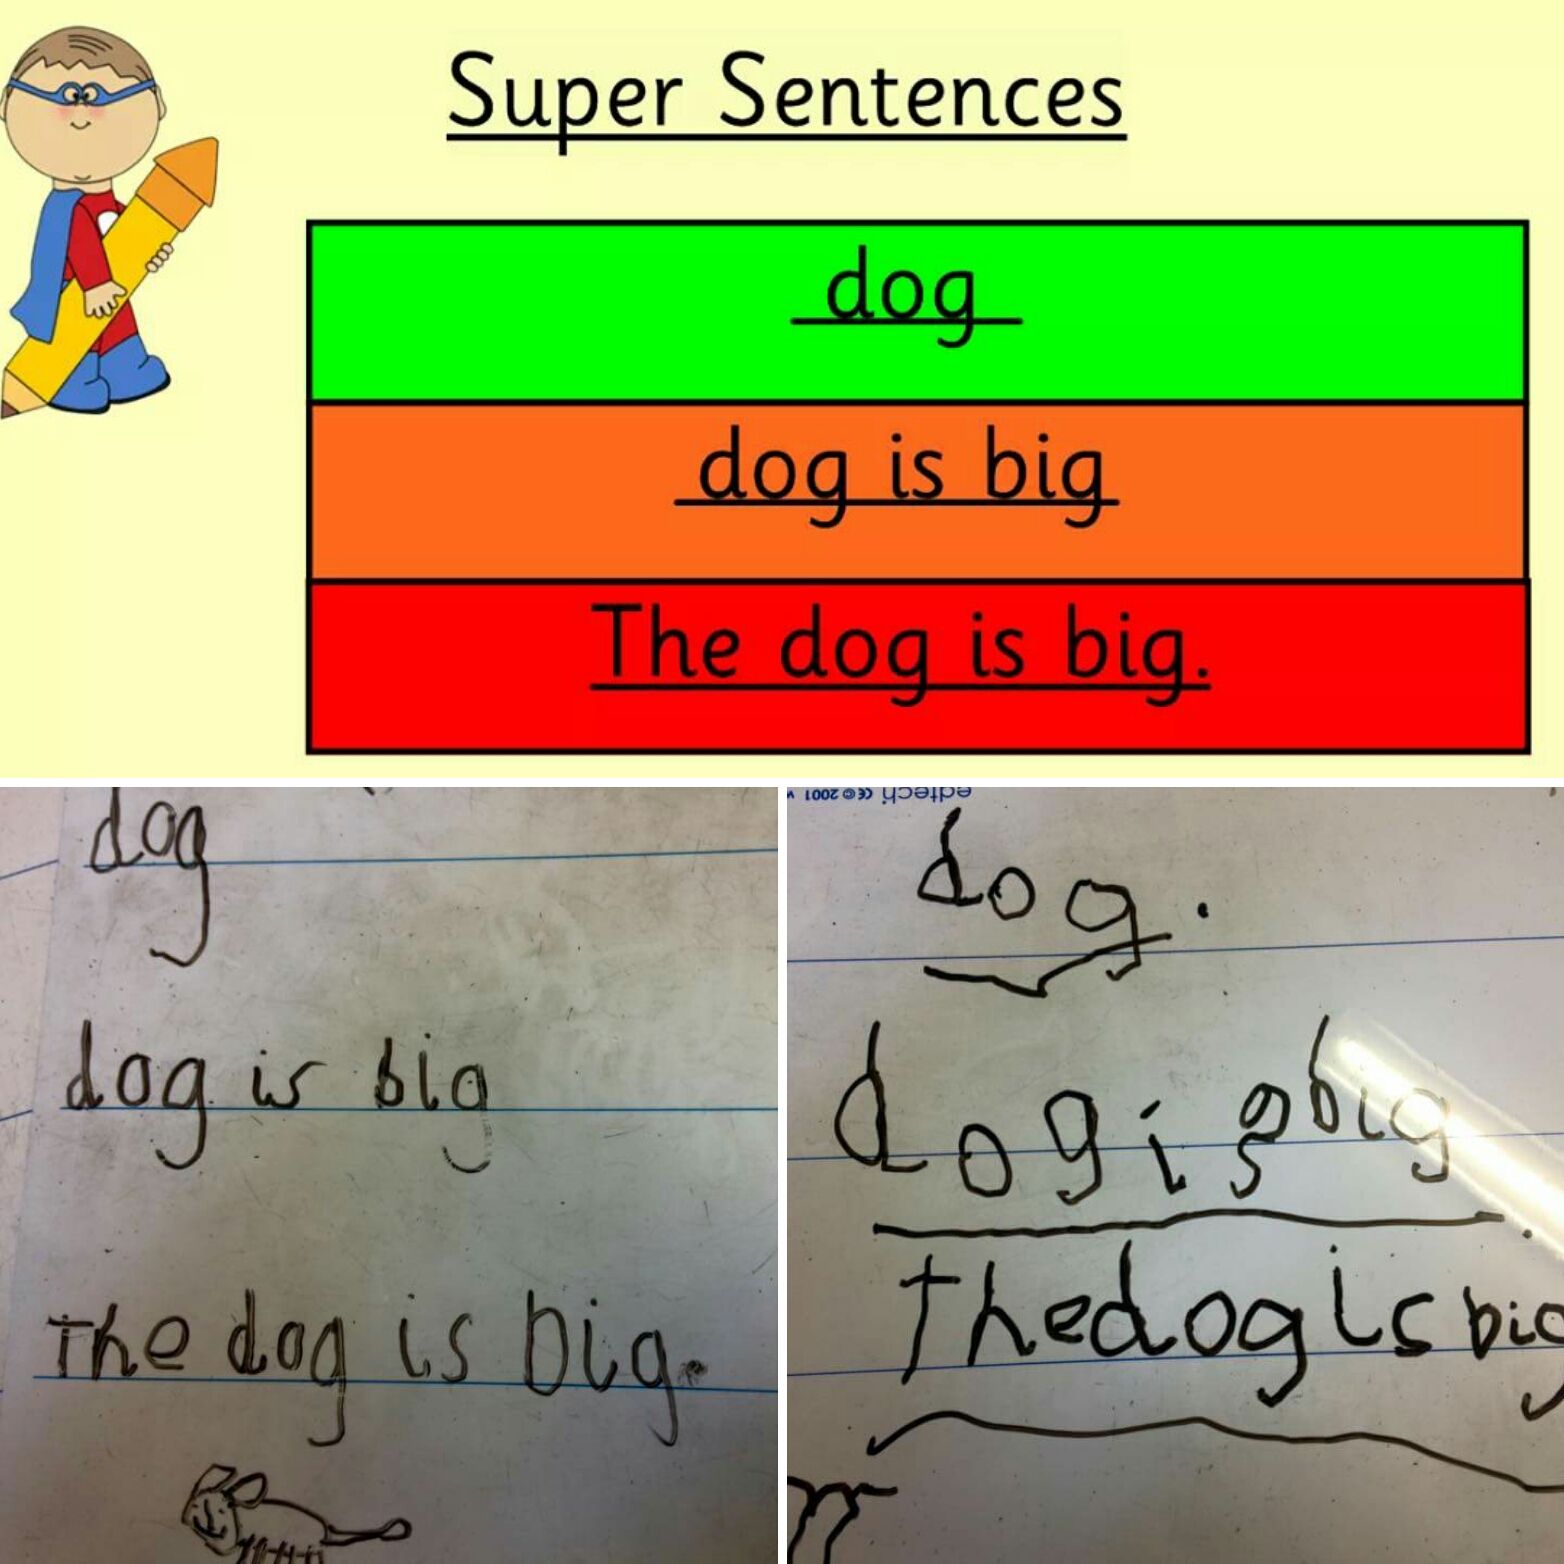 word of the day and example sentence